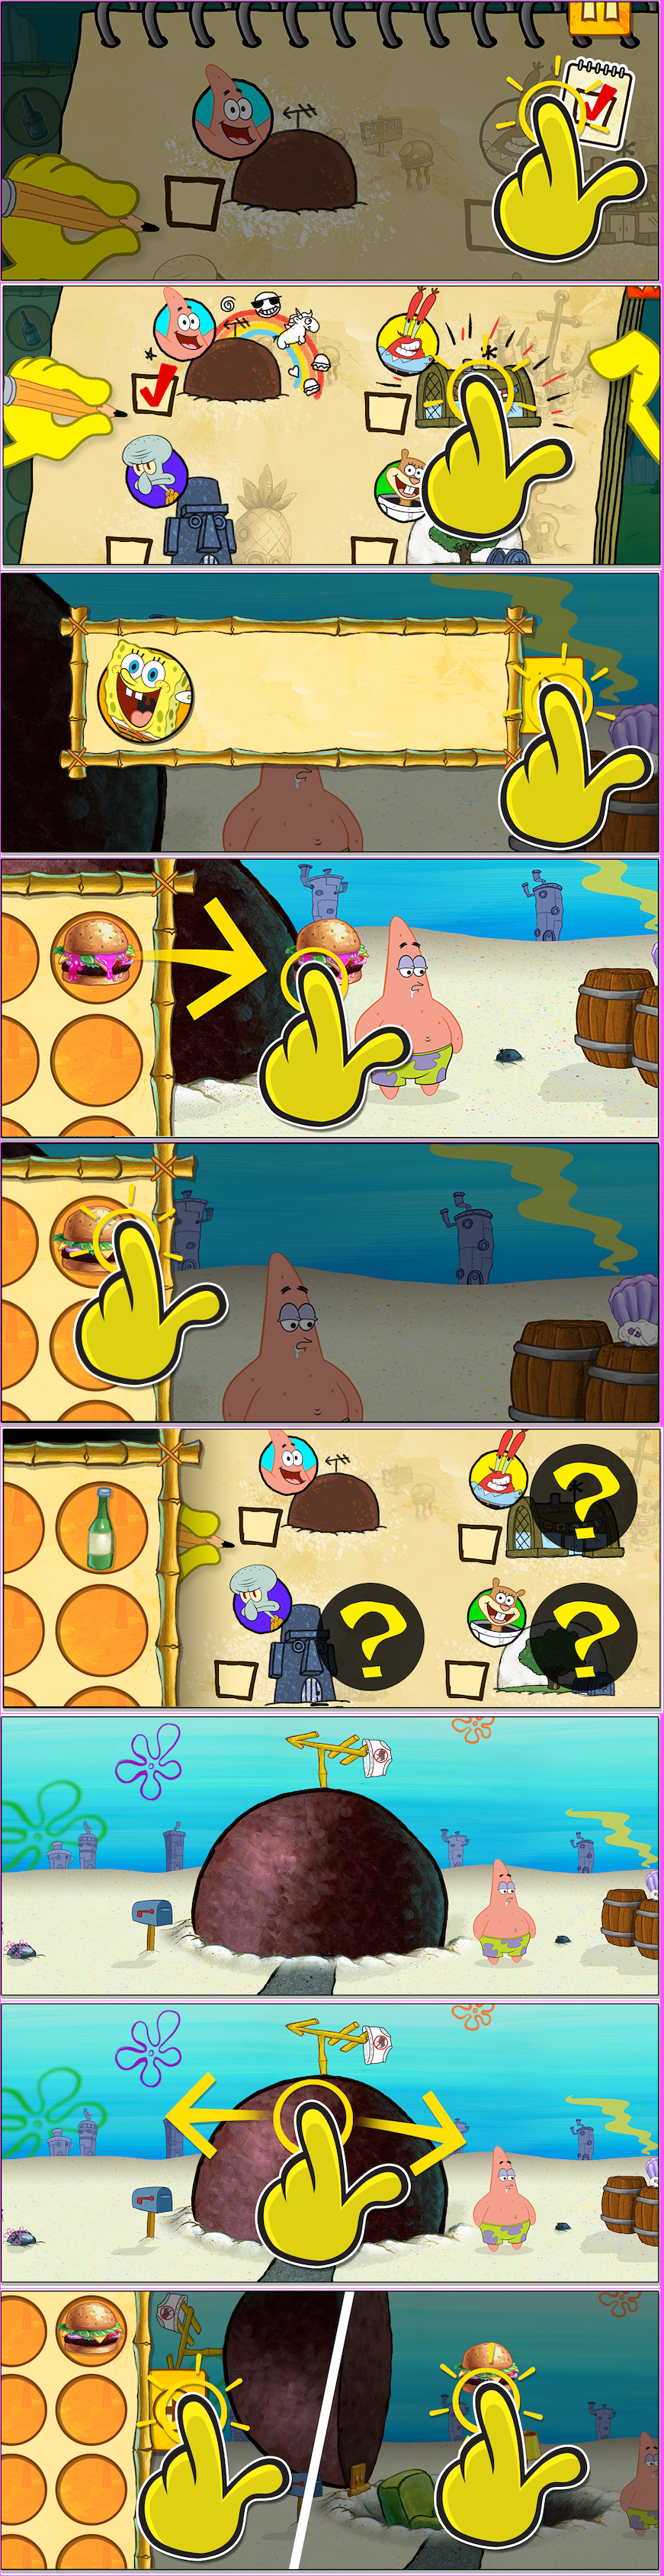 SpongeBob Saves The Day - How To Play & Question Mark